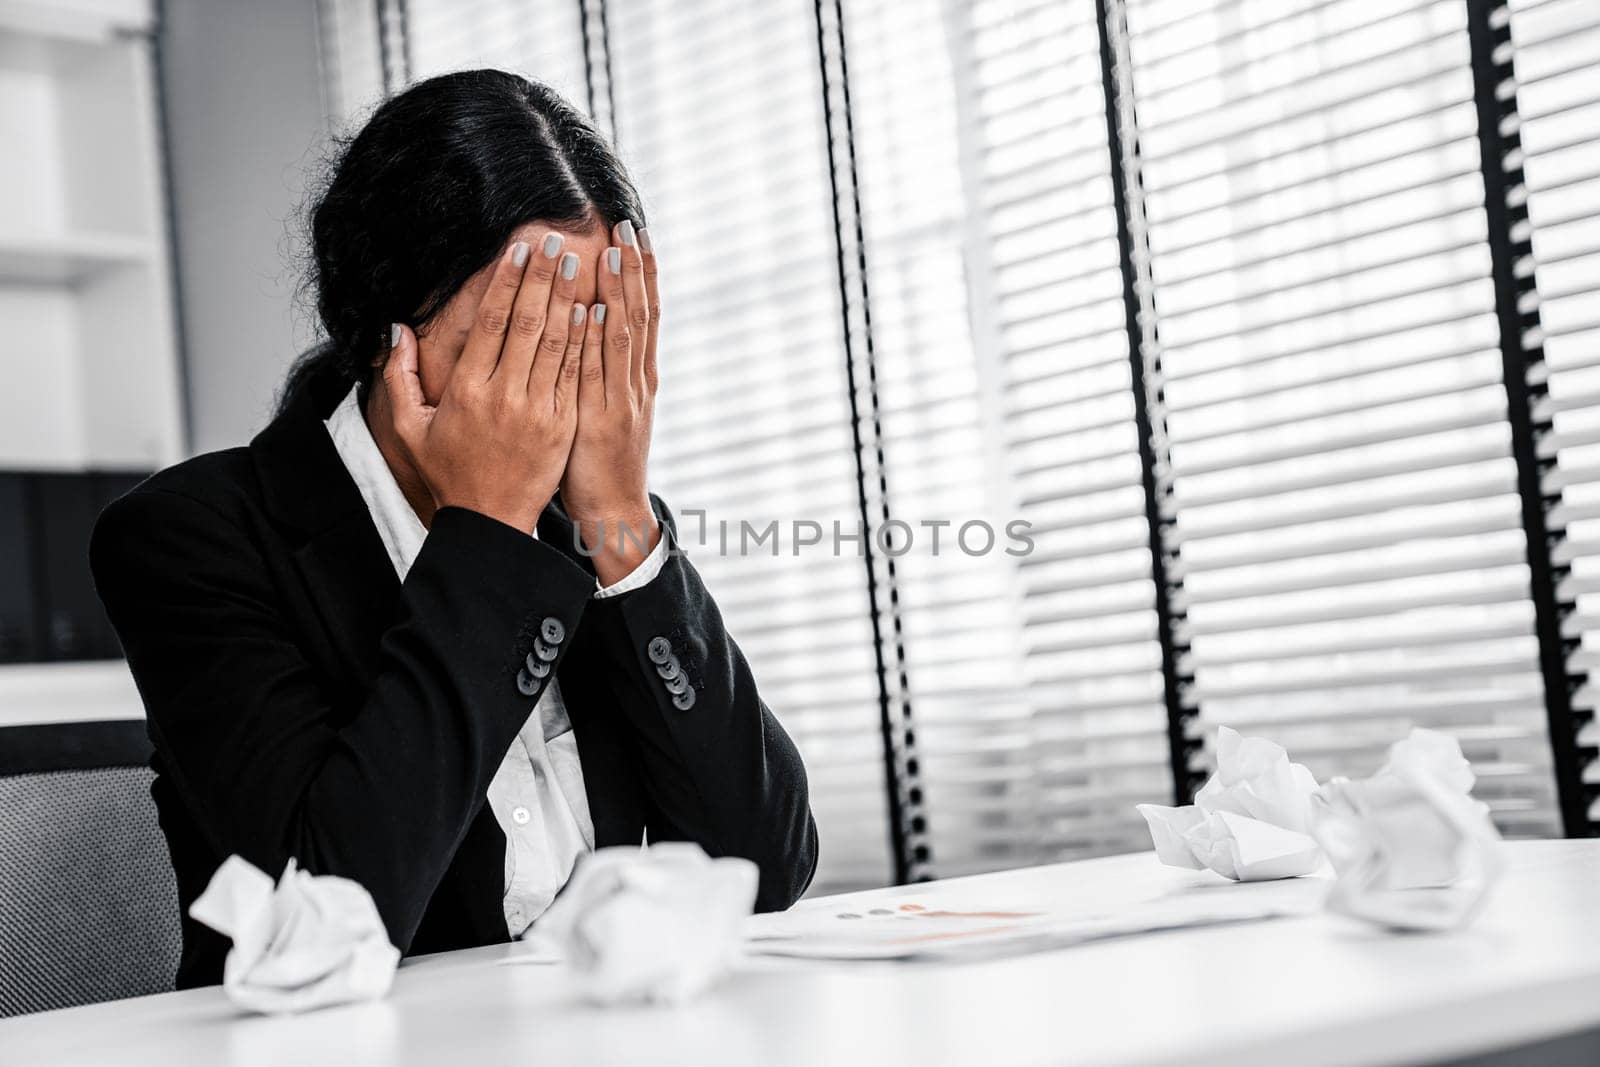 A competent female employee who has become completely exhausted as a result of overburdened work. Concept of unhealthy life as an office worker, office syndrome, effect from overwork.